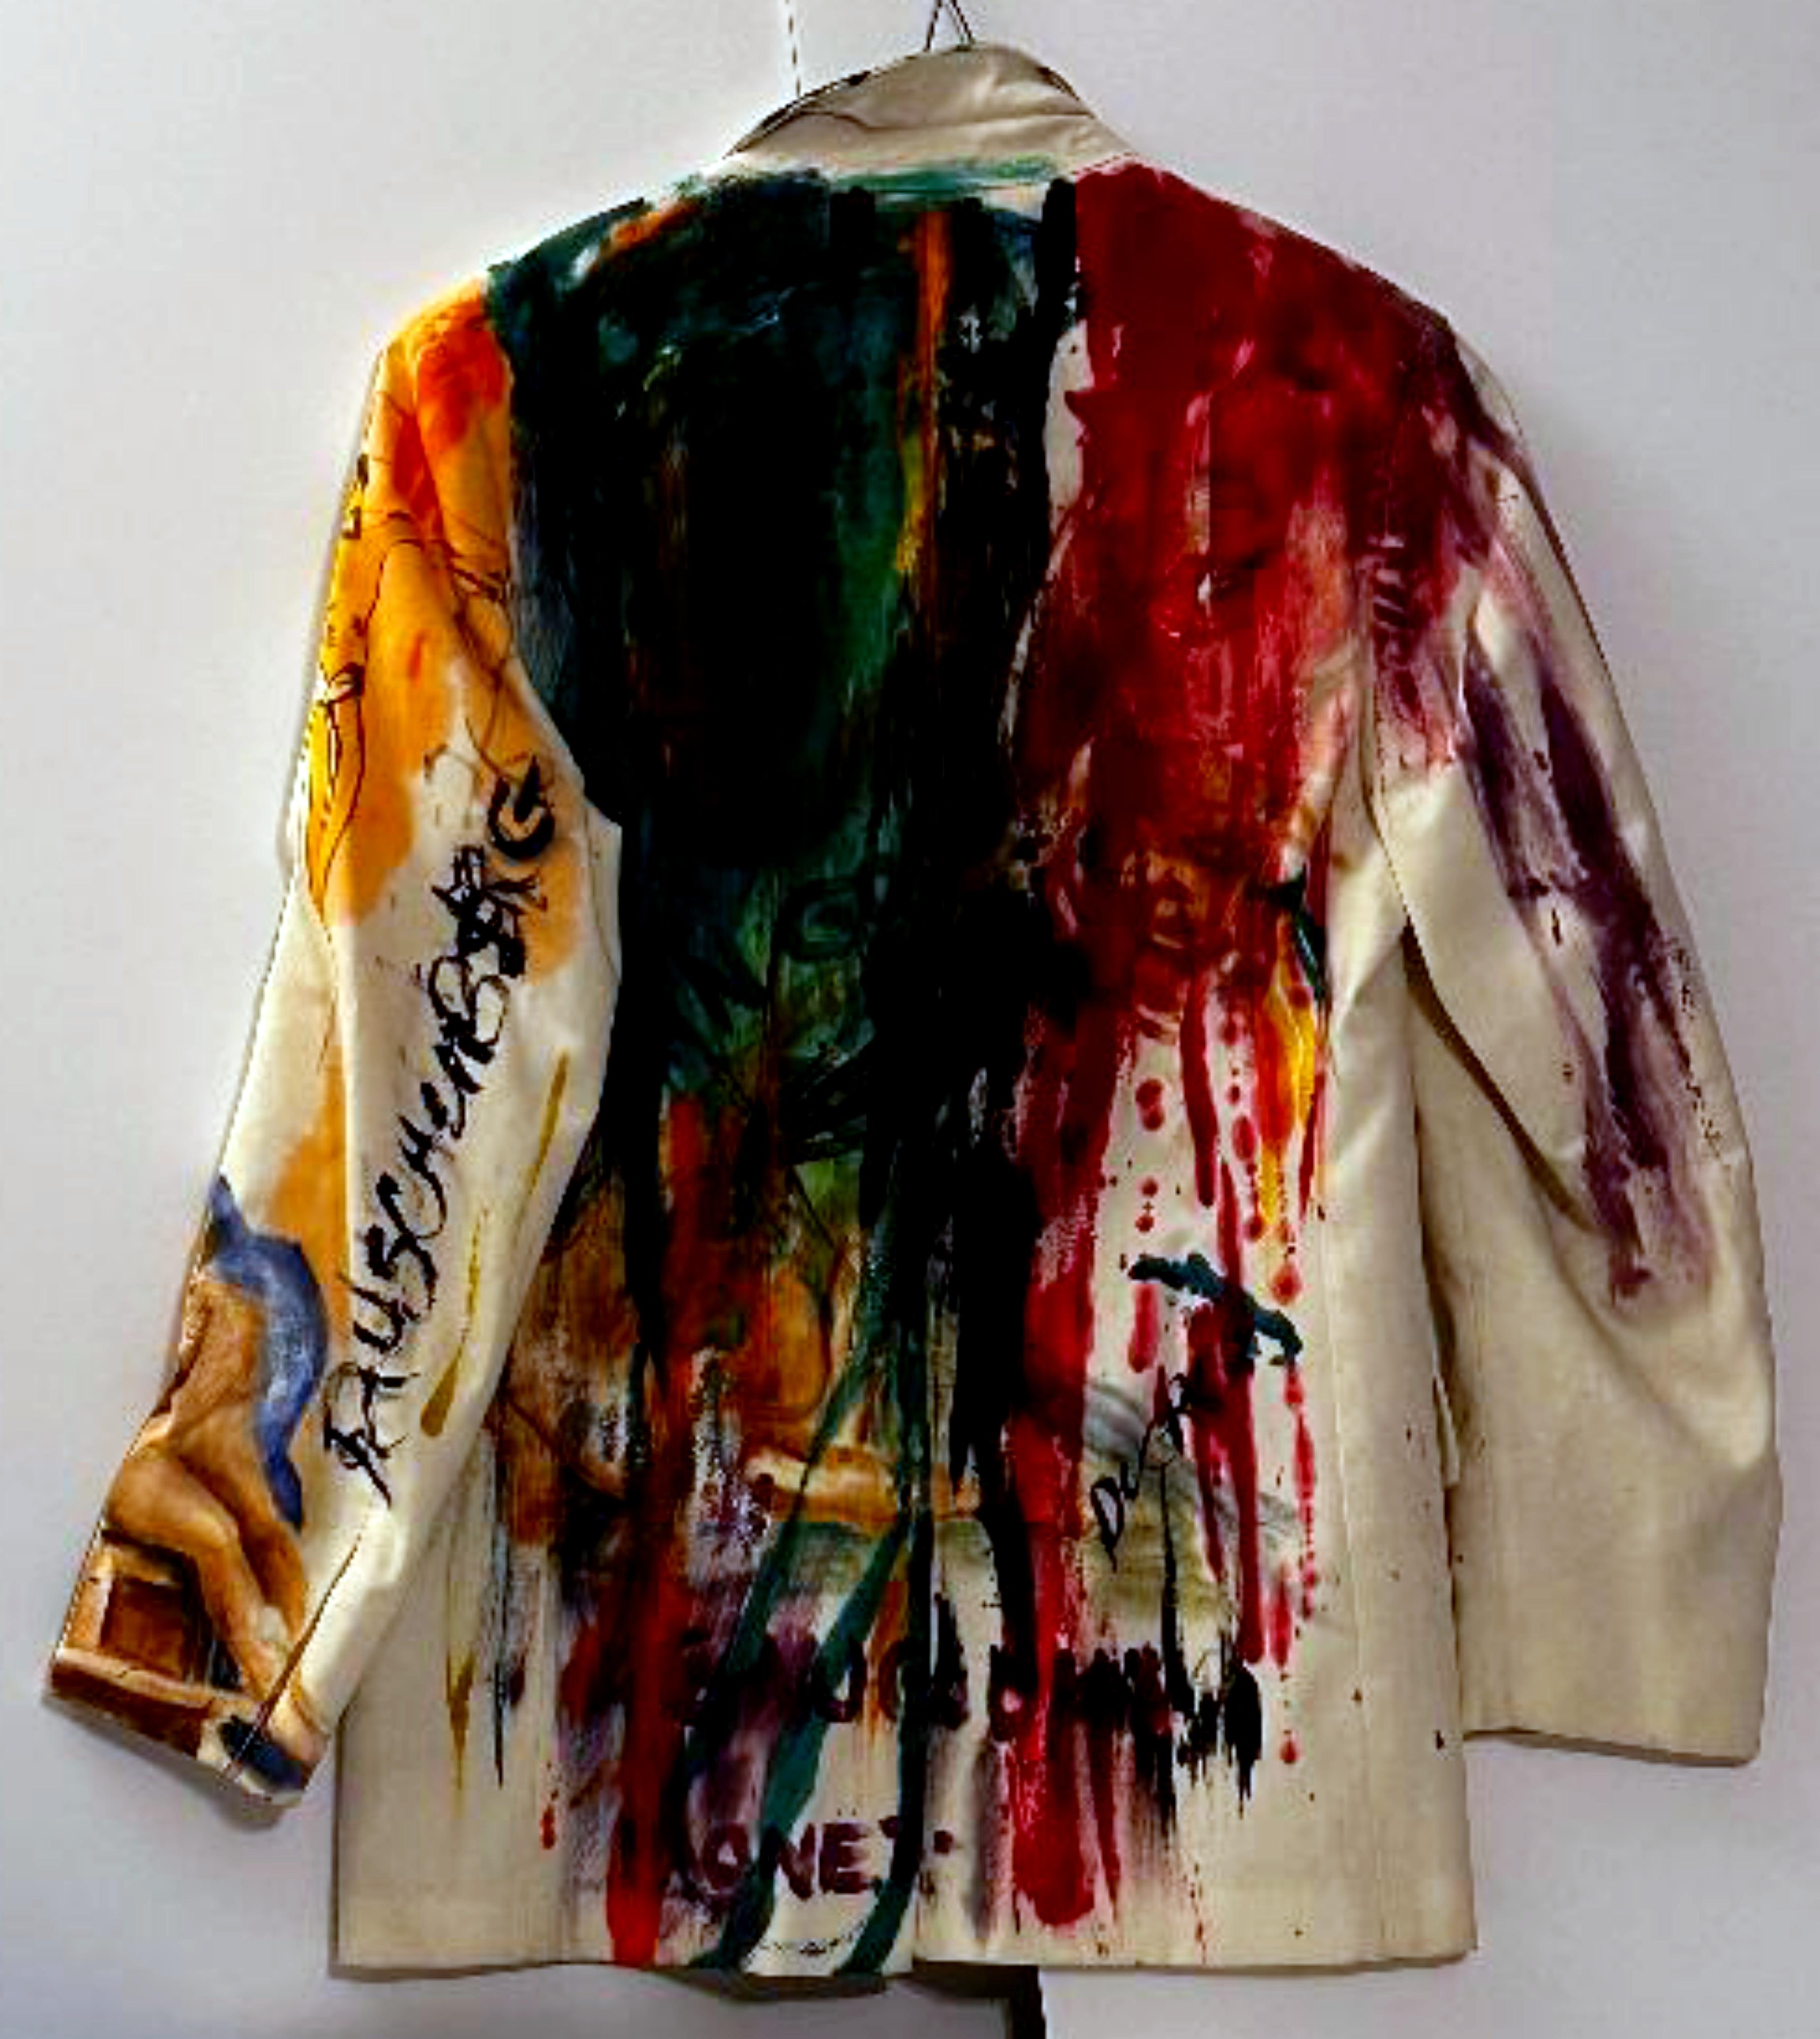 The Art Jacket with Picasso, Cezanne & Monet, hand signed by Robert Rauschenberg For Sale 3